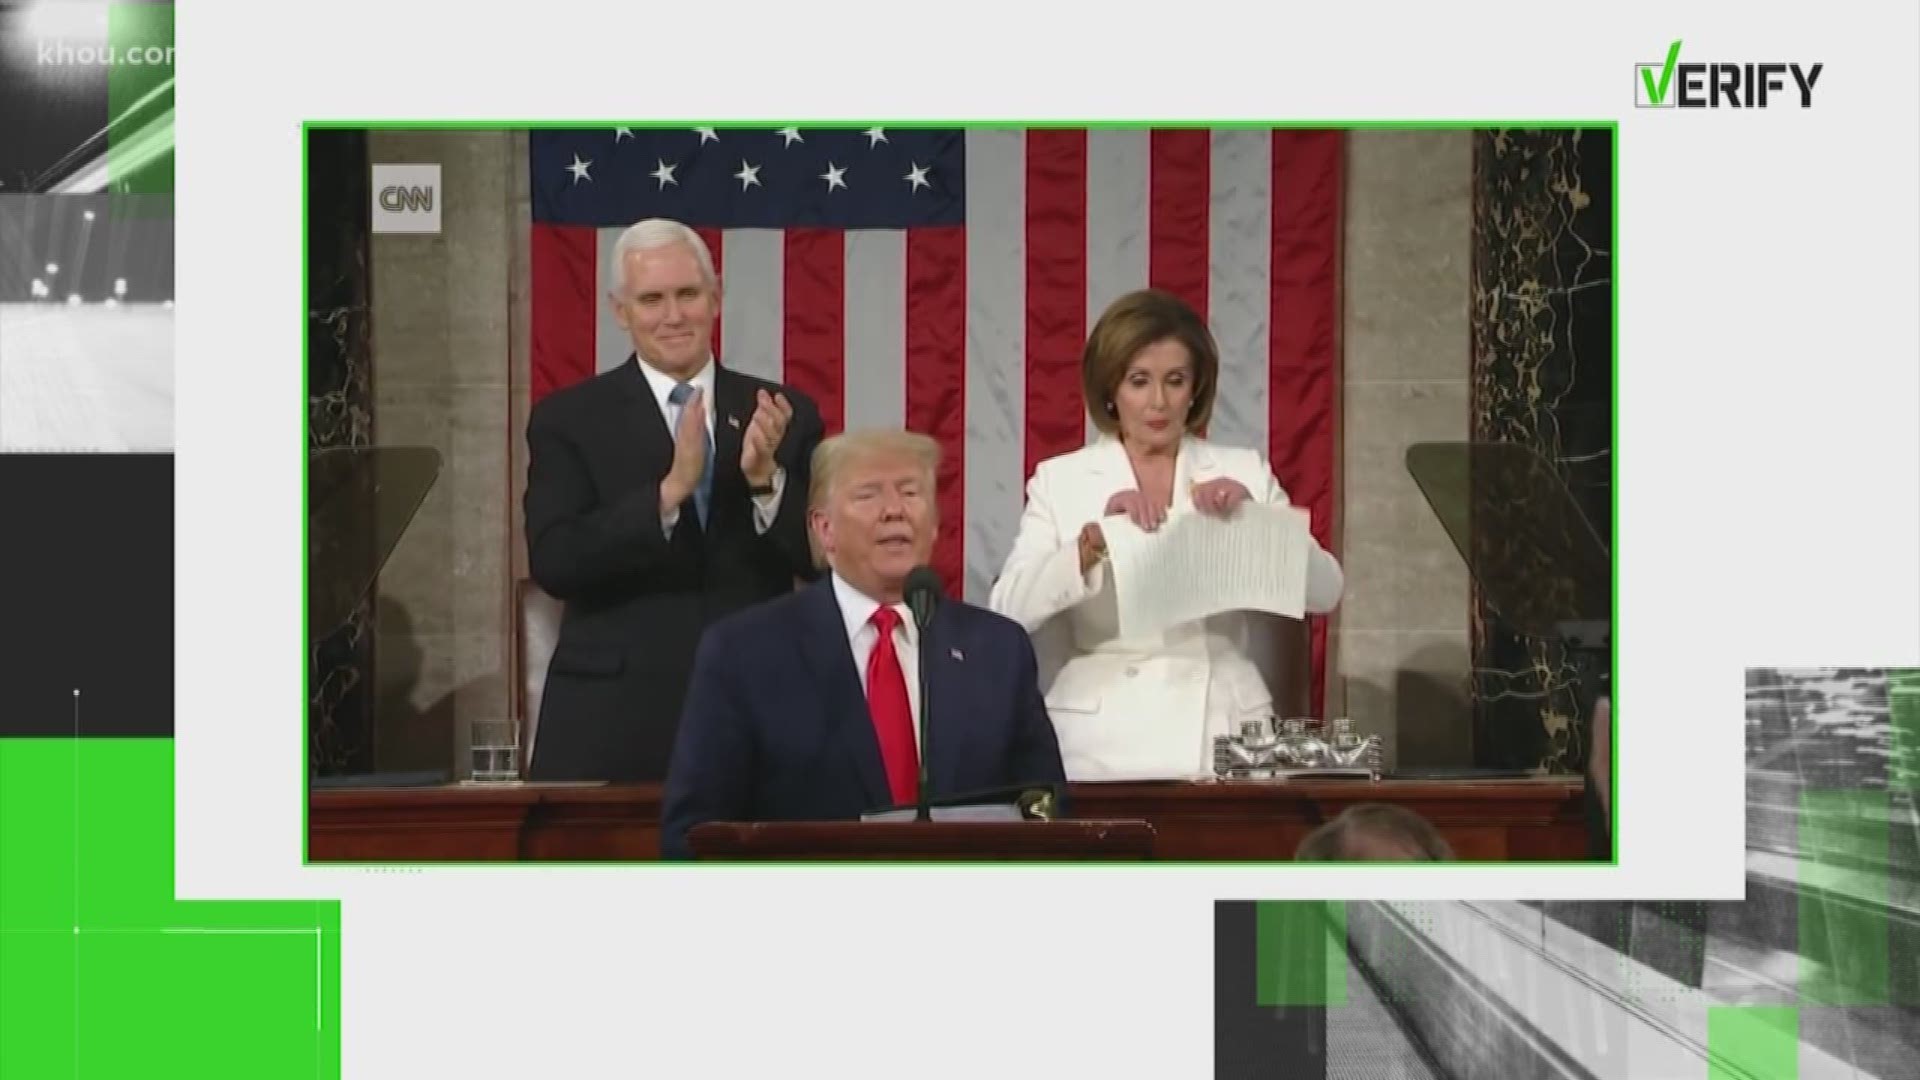 Social media exploded the moment Pelosi ripped up her copy of the State of the Union speech. Viewers reached out via email asking if that action was illegal.